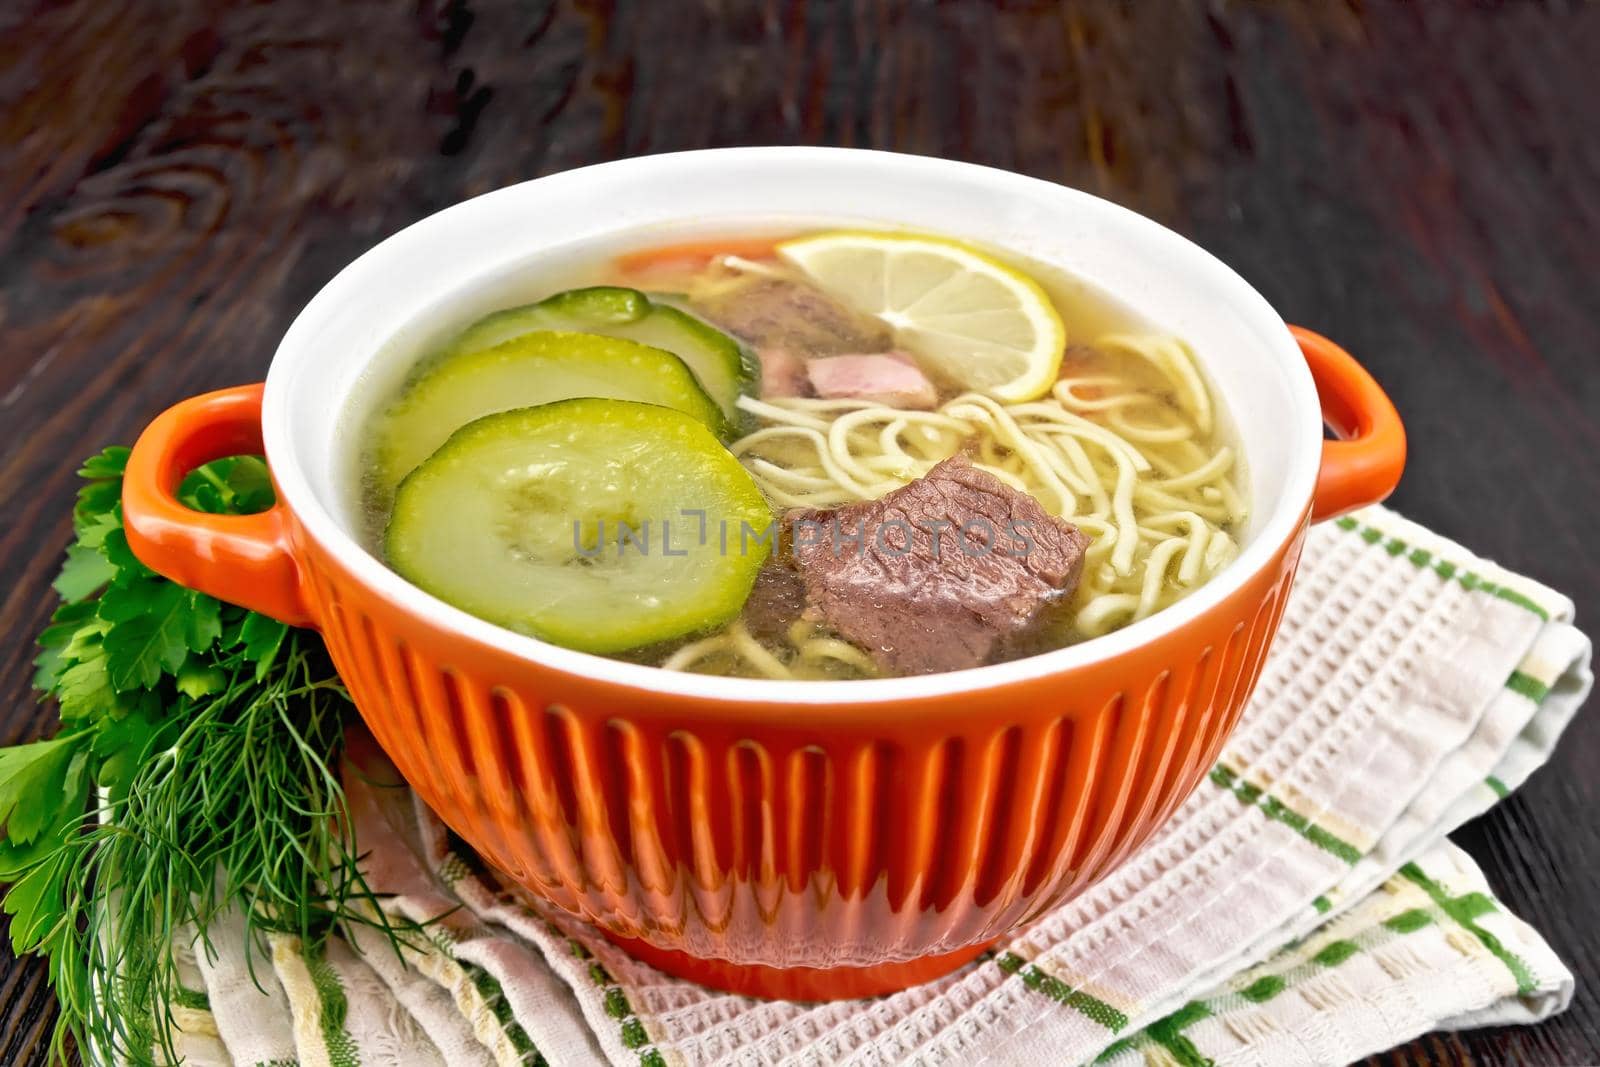 Soup with zucchini and noodles in red bowl on table by rezkrr